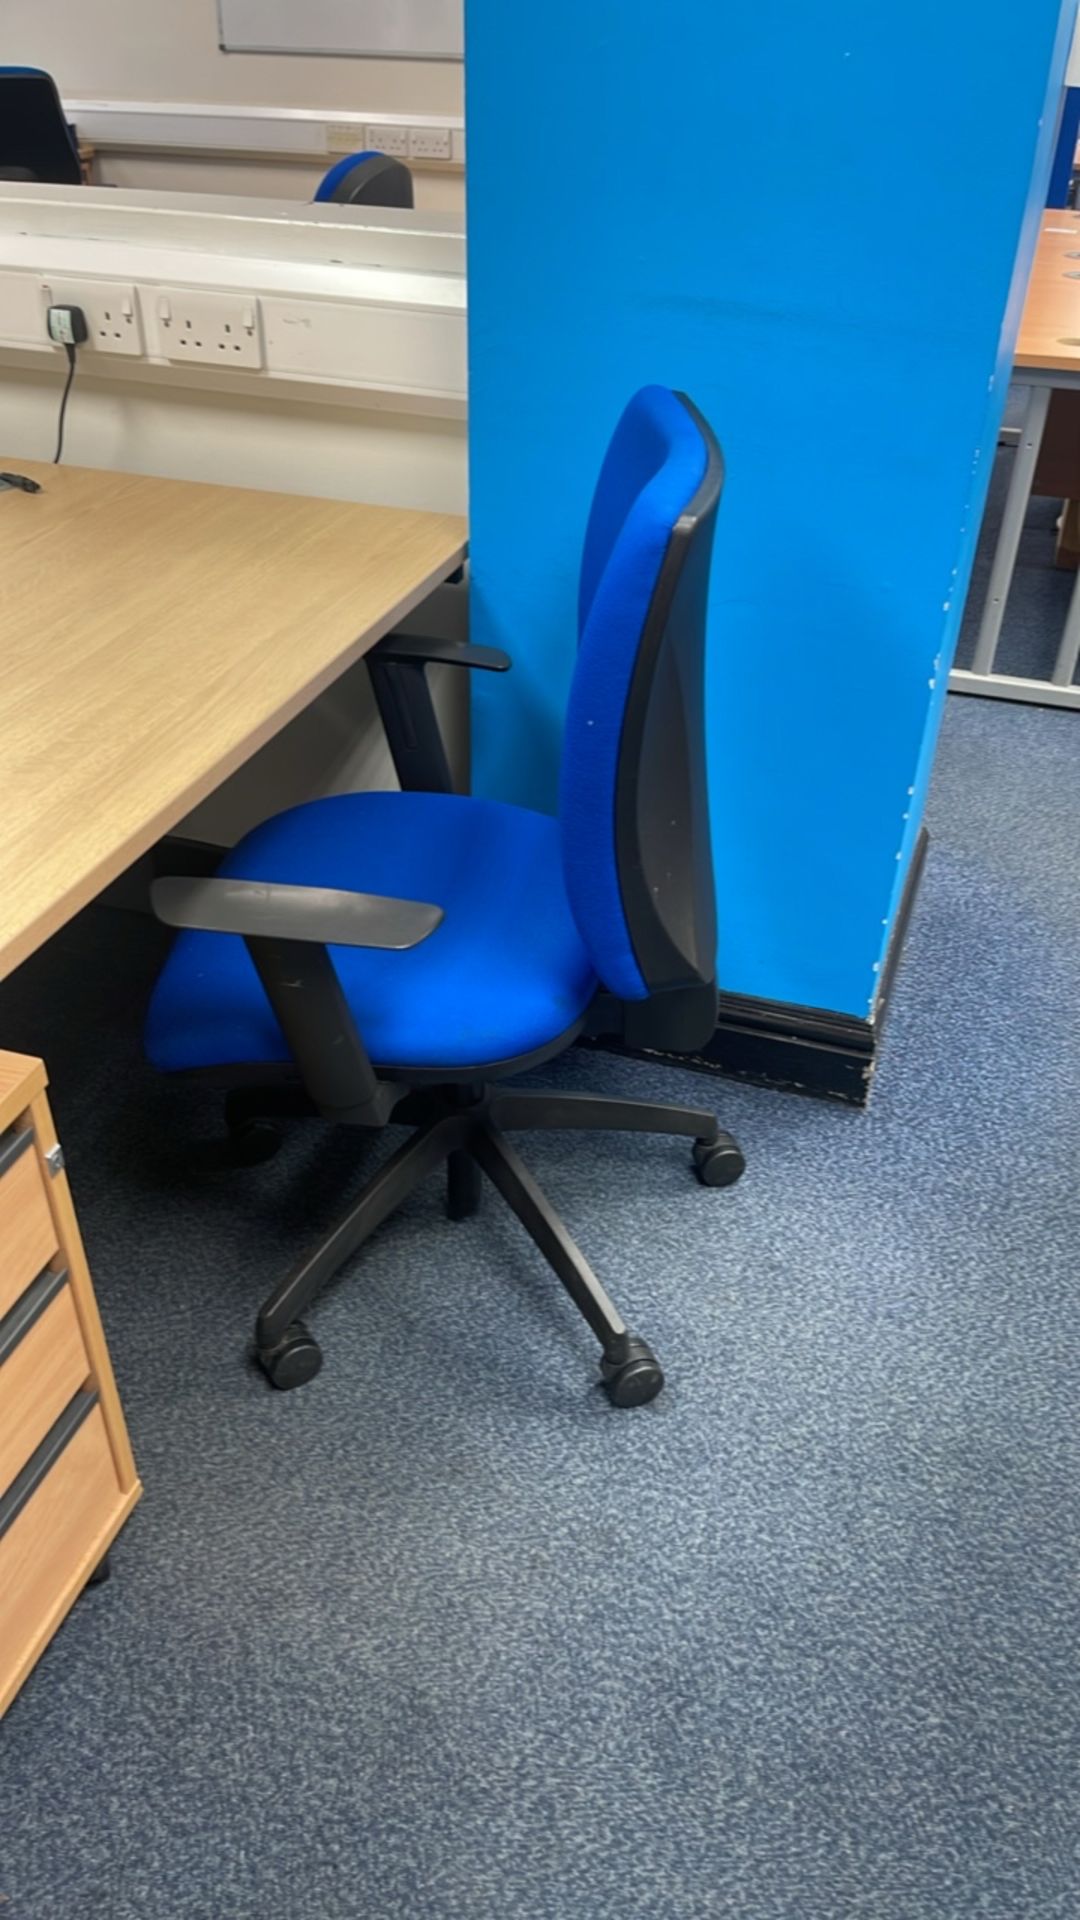 Pair Of Office Desks, Chairs - Image 6 of 7